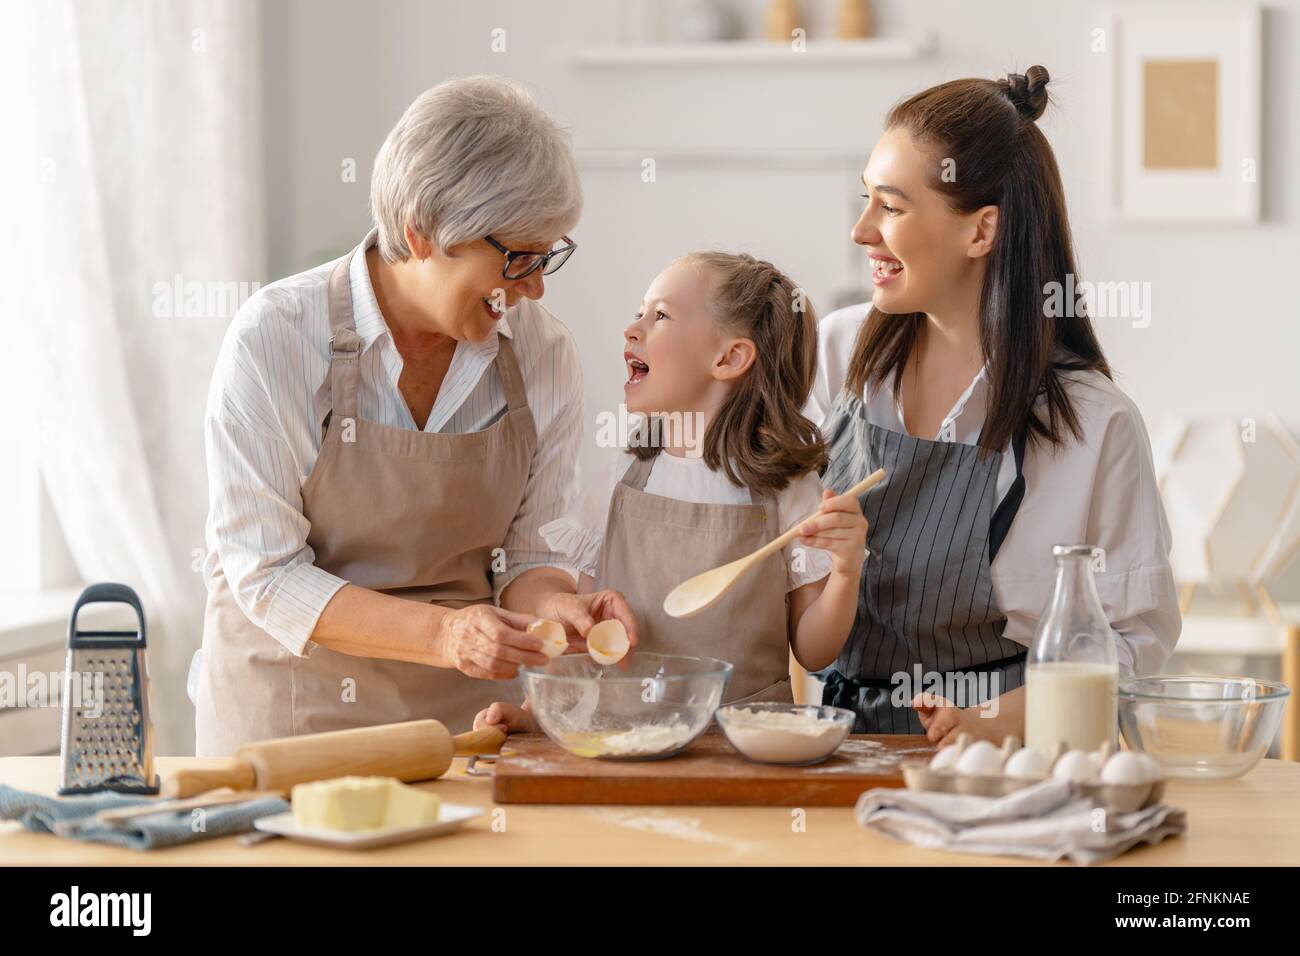 https://c8.alamy.com/comp/2FNKNAE/happy-loving-family-are-preparing-bakery-together-granny-mom-and-child-are-cooking-cookies-and-having-fun-in-the-kitchen-homemade-food-and-little-h-2FNKNAE.jpg